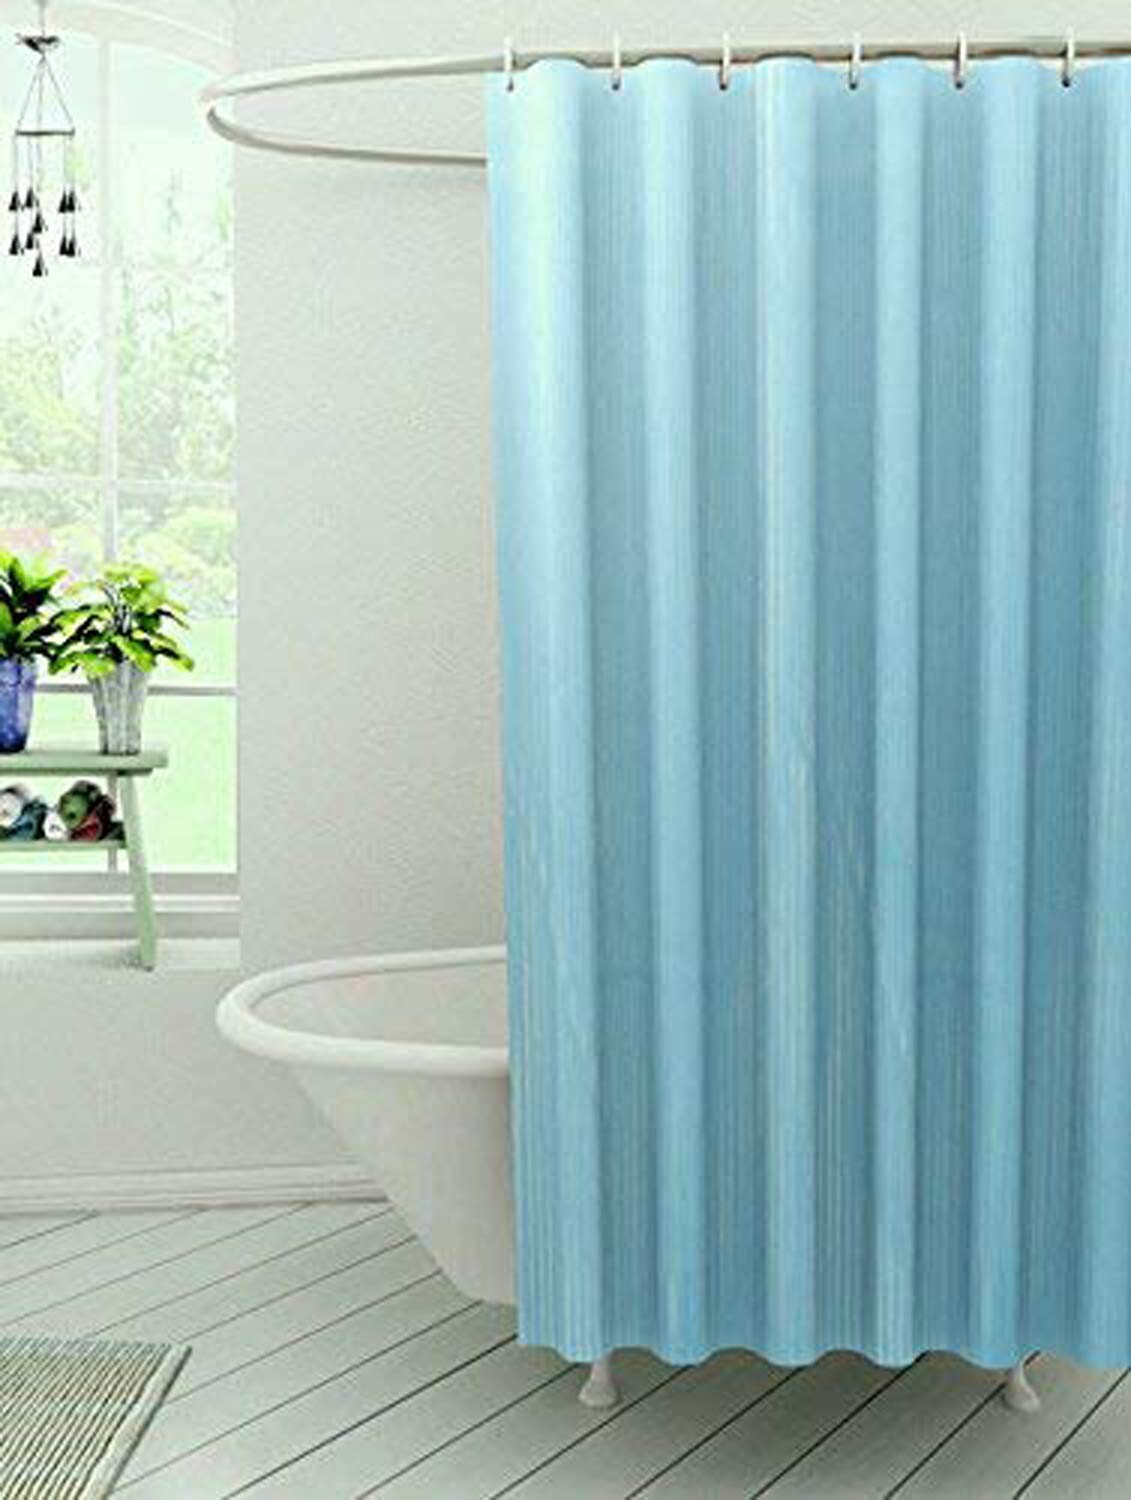 Kuber Industries Polyvinyl Chloride Self Lining Shower Curtain with 8 Hooks (Sky Blue, Standard)